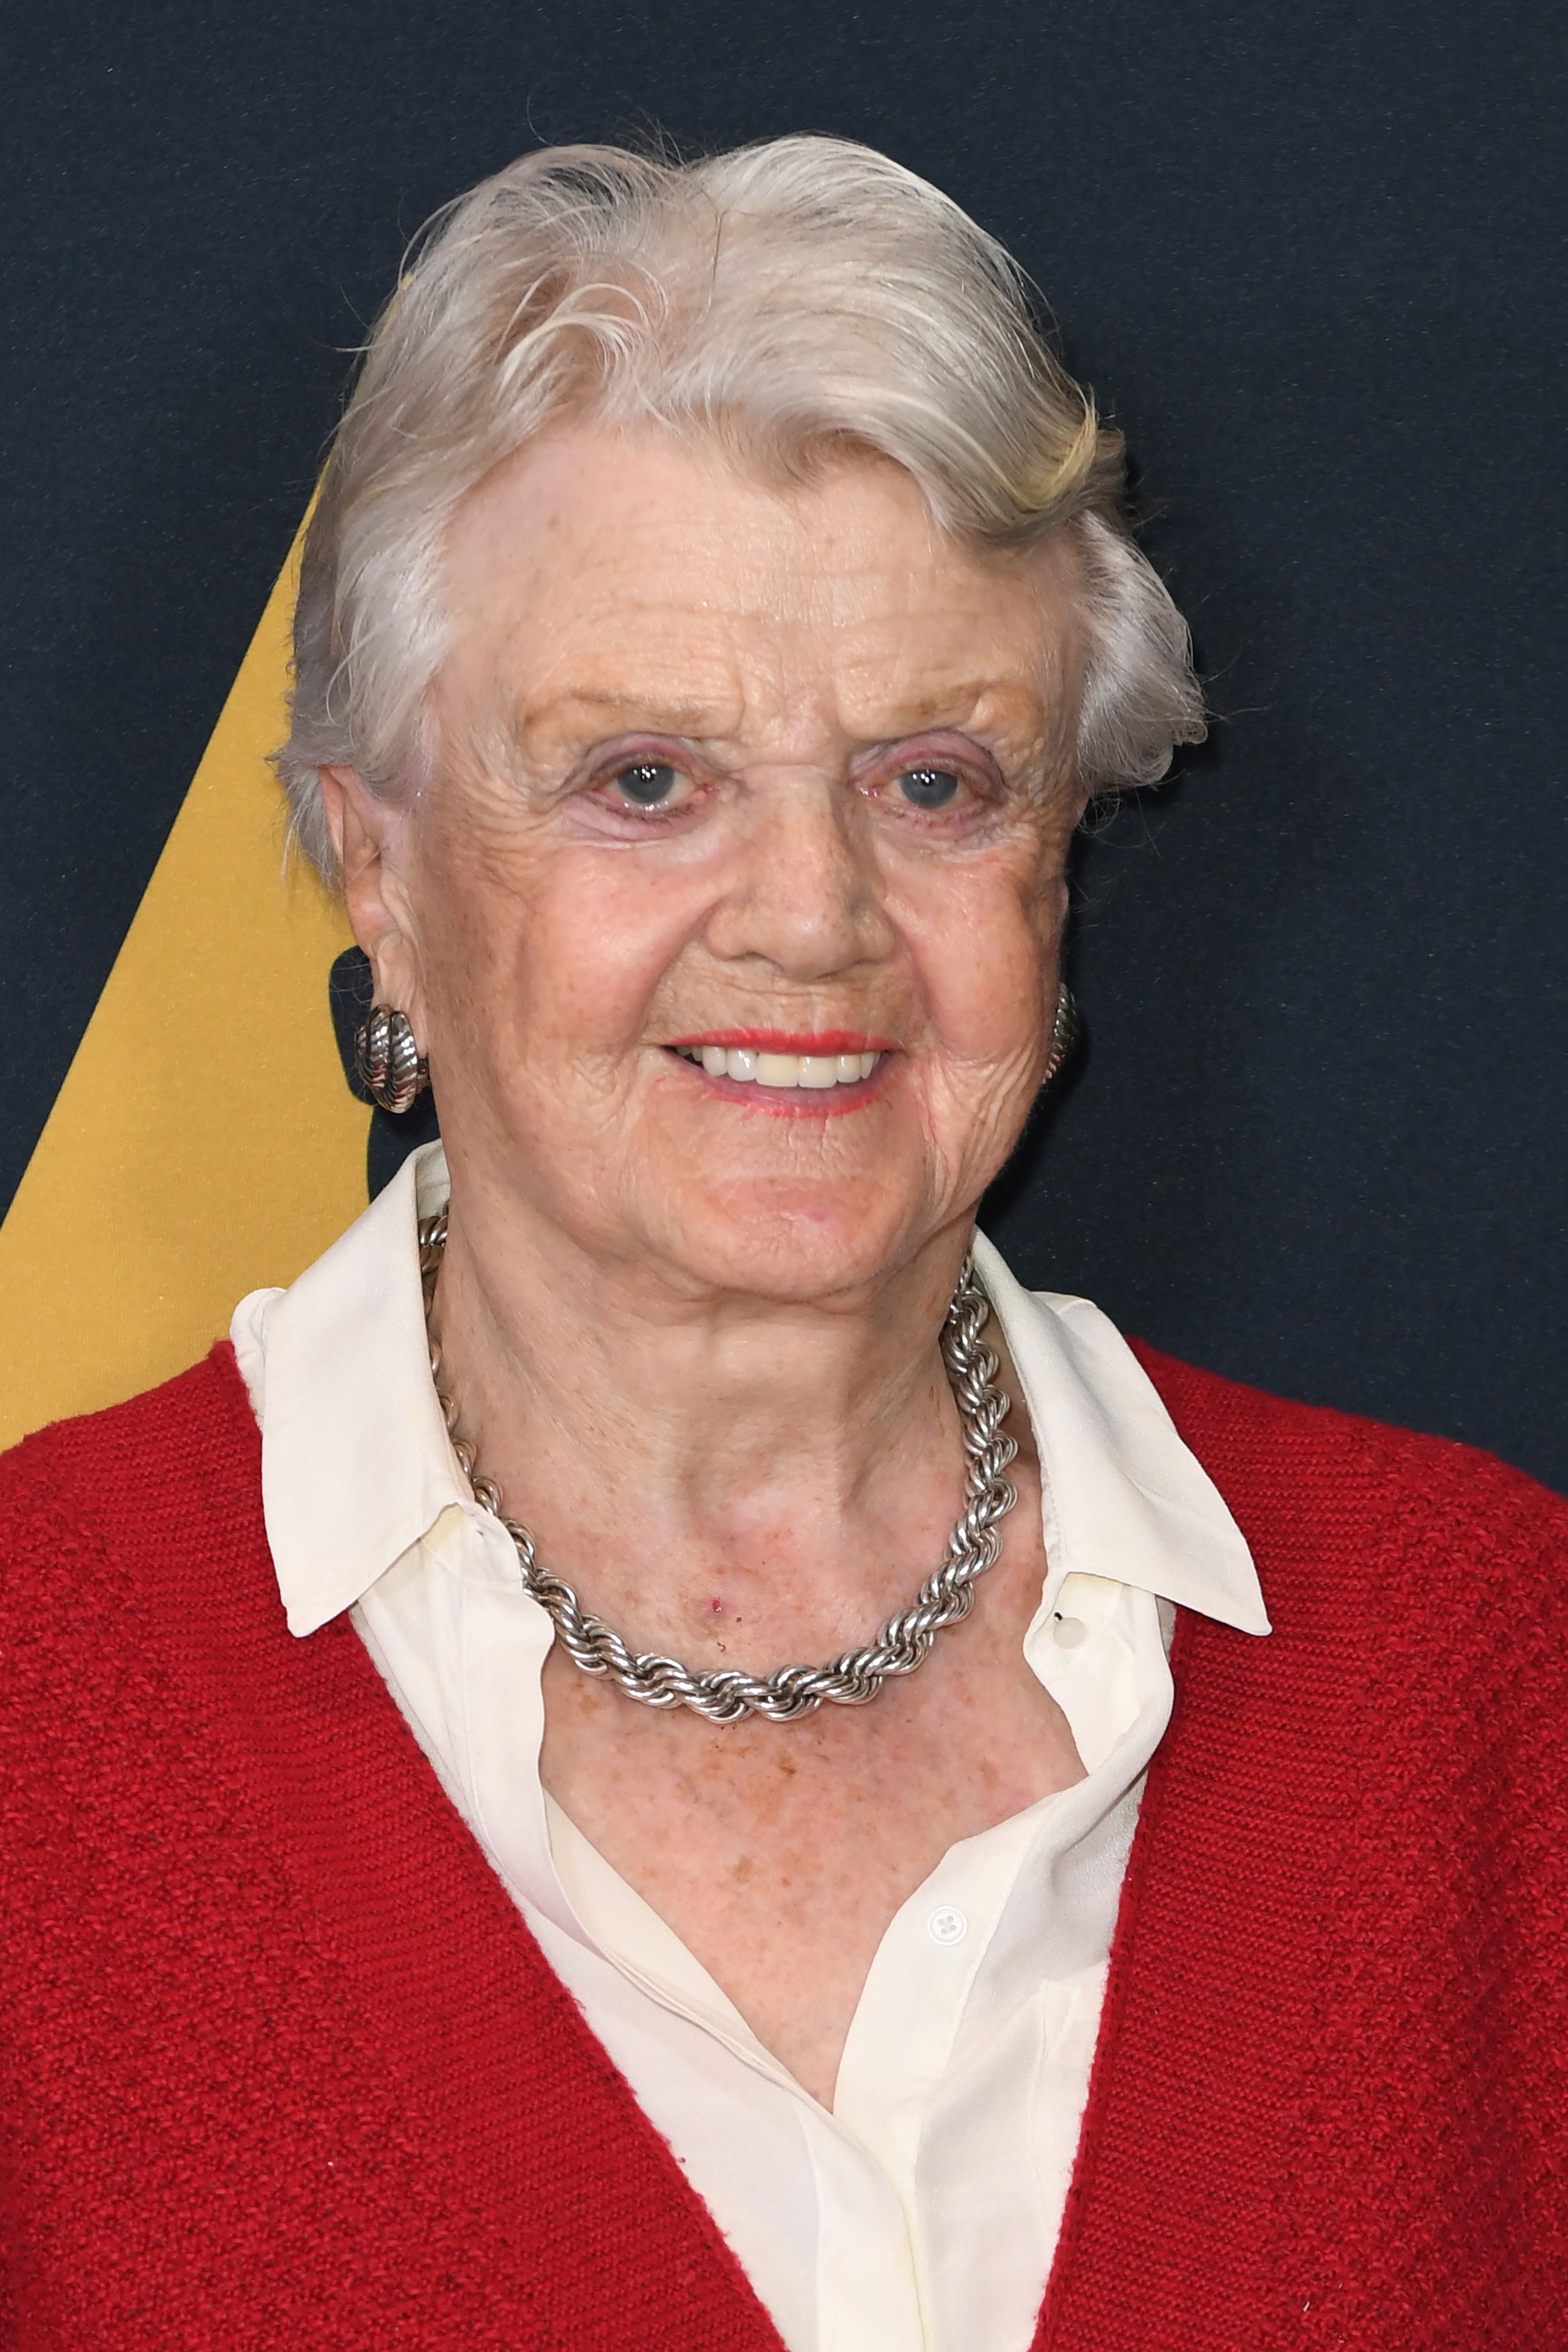 Angela Lansbury at the inaugural Robert Osborne Celebration of Classic Film event at the Academy of Motion Picture Arts and Sciences in Beverly Hills, California, on October 7, 2019 | Source: Getty Images